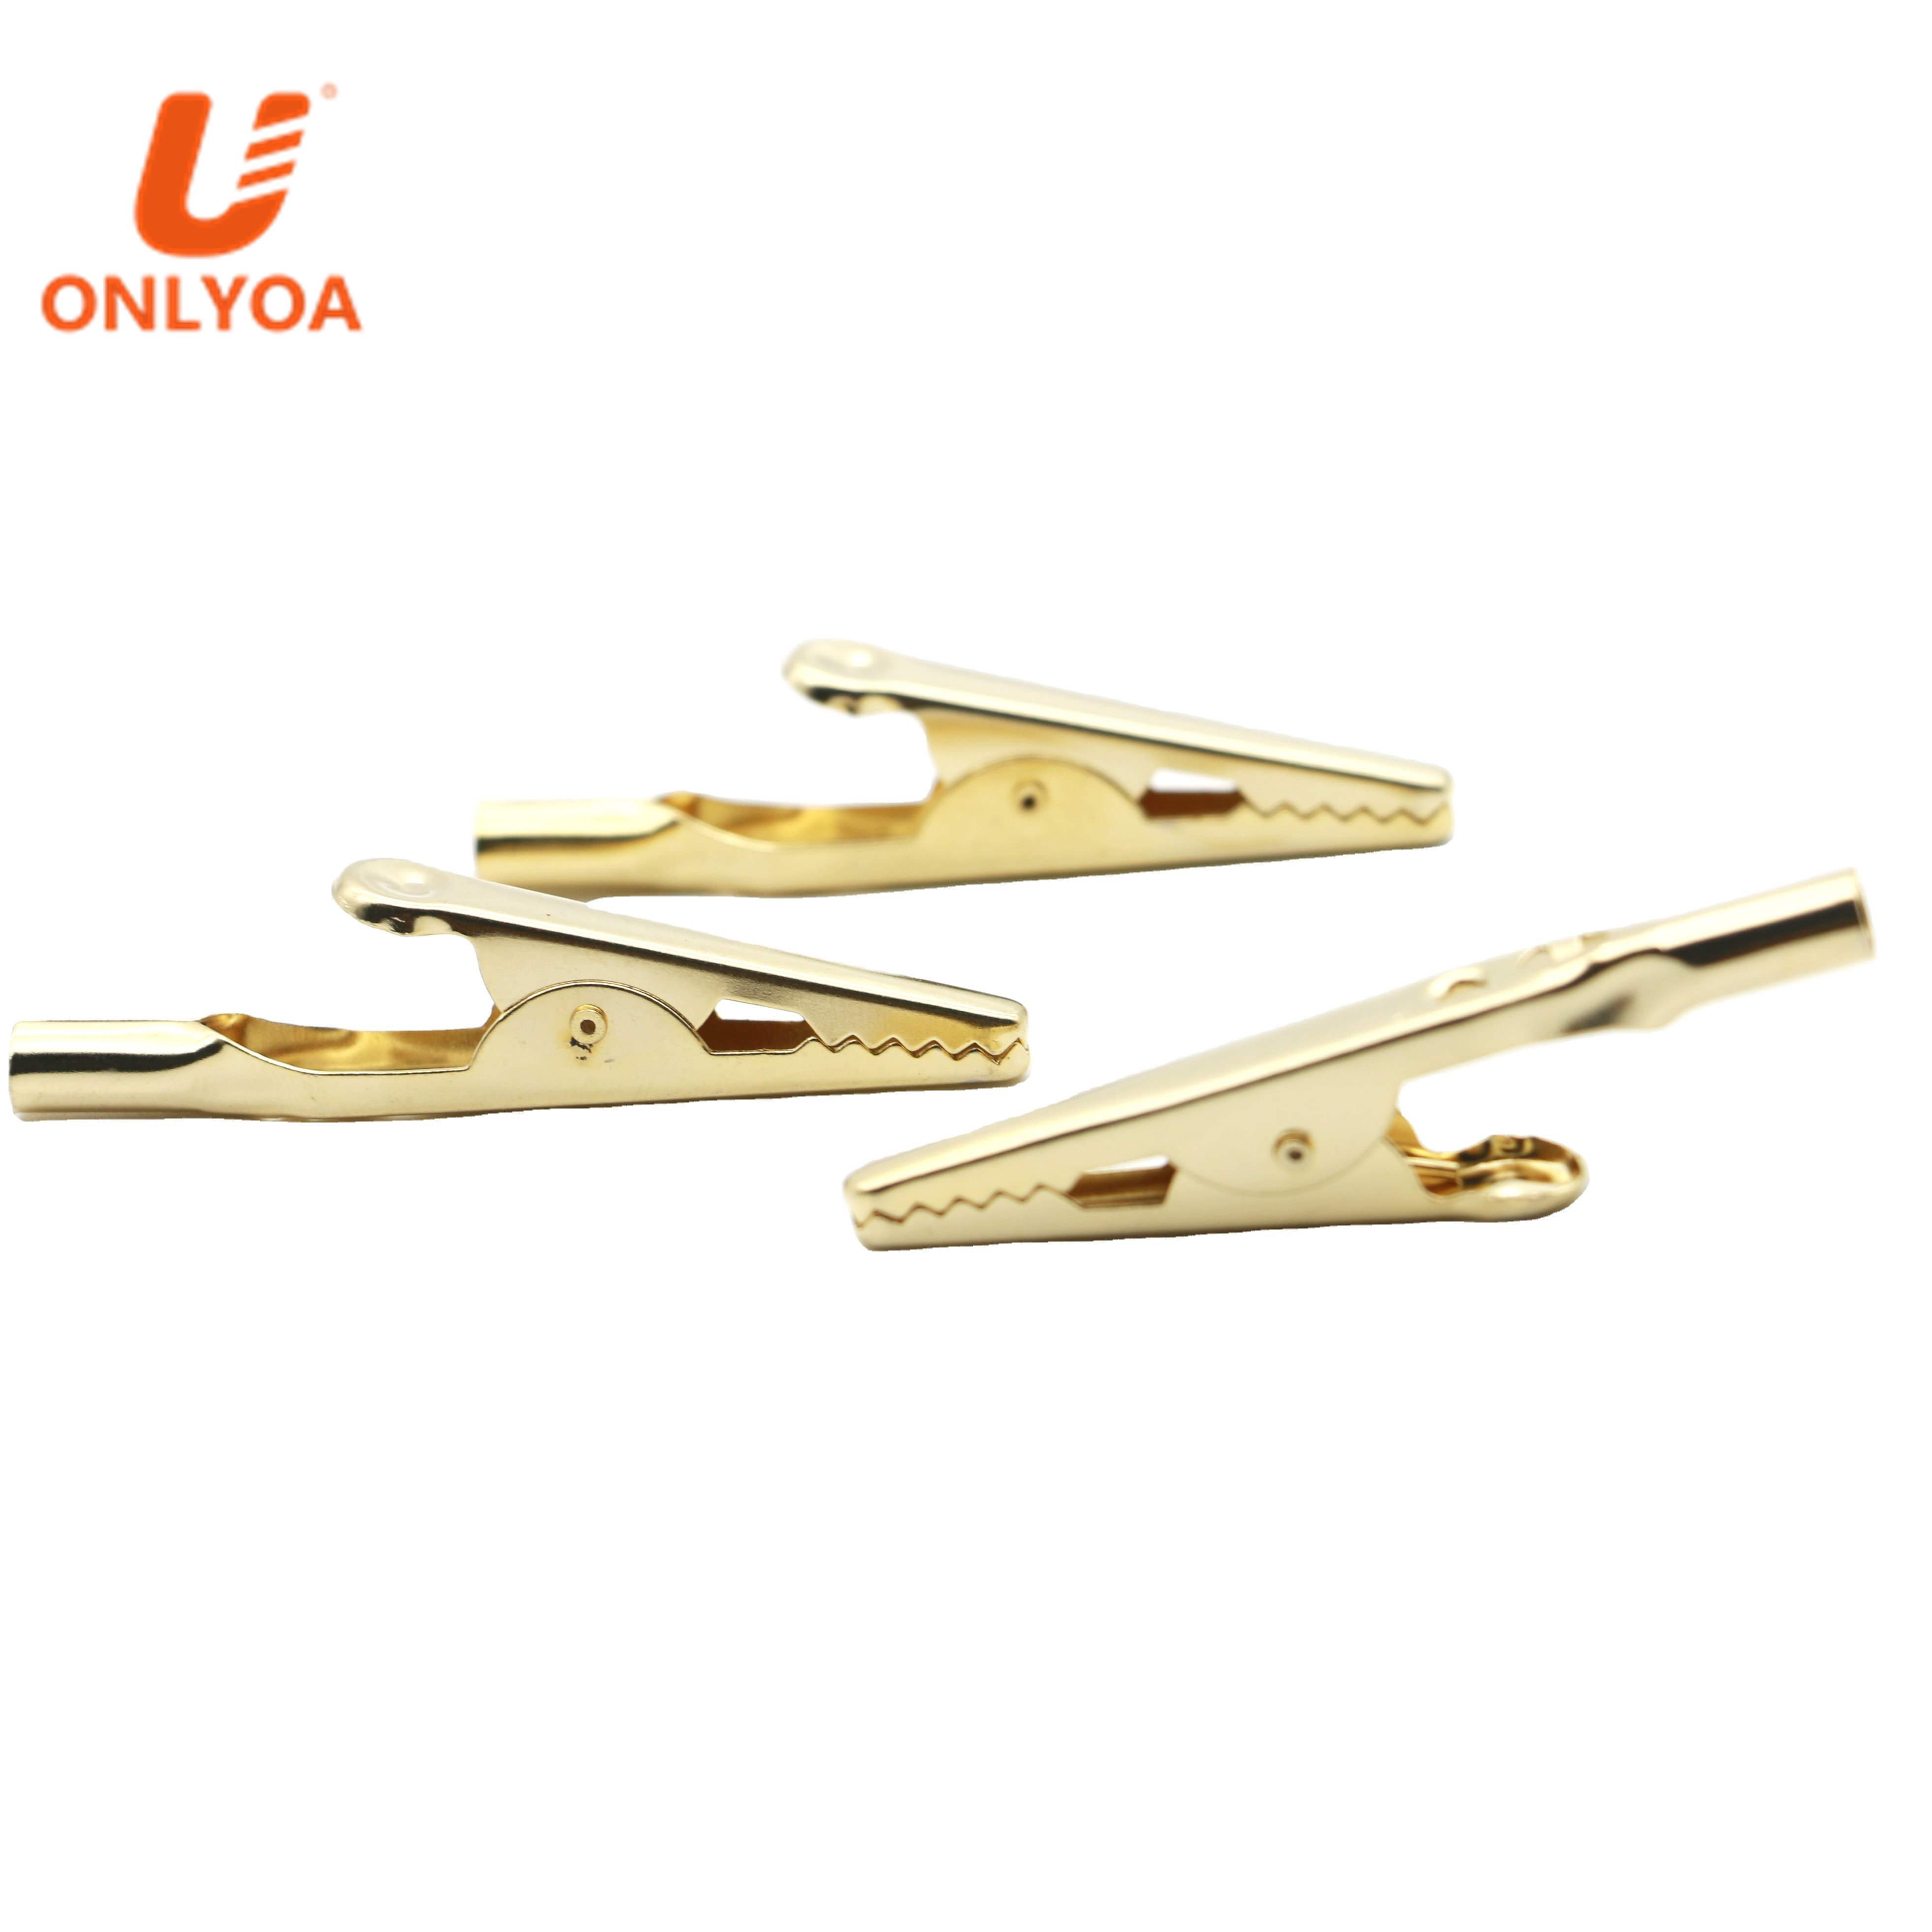 ONLYOA High quality in-line 4mm banana plug 50mm 5A Golden plating alligator battery clip test crocodile clamp